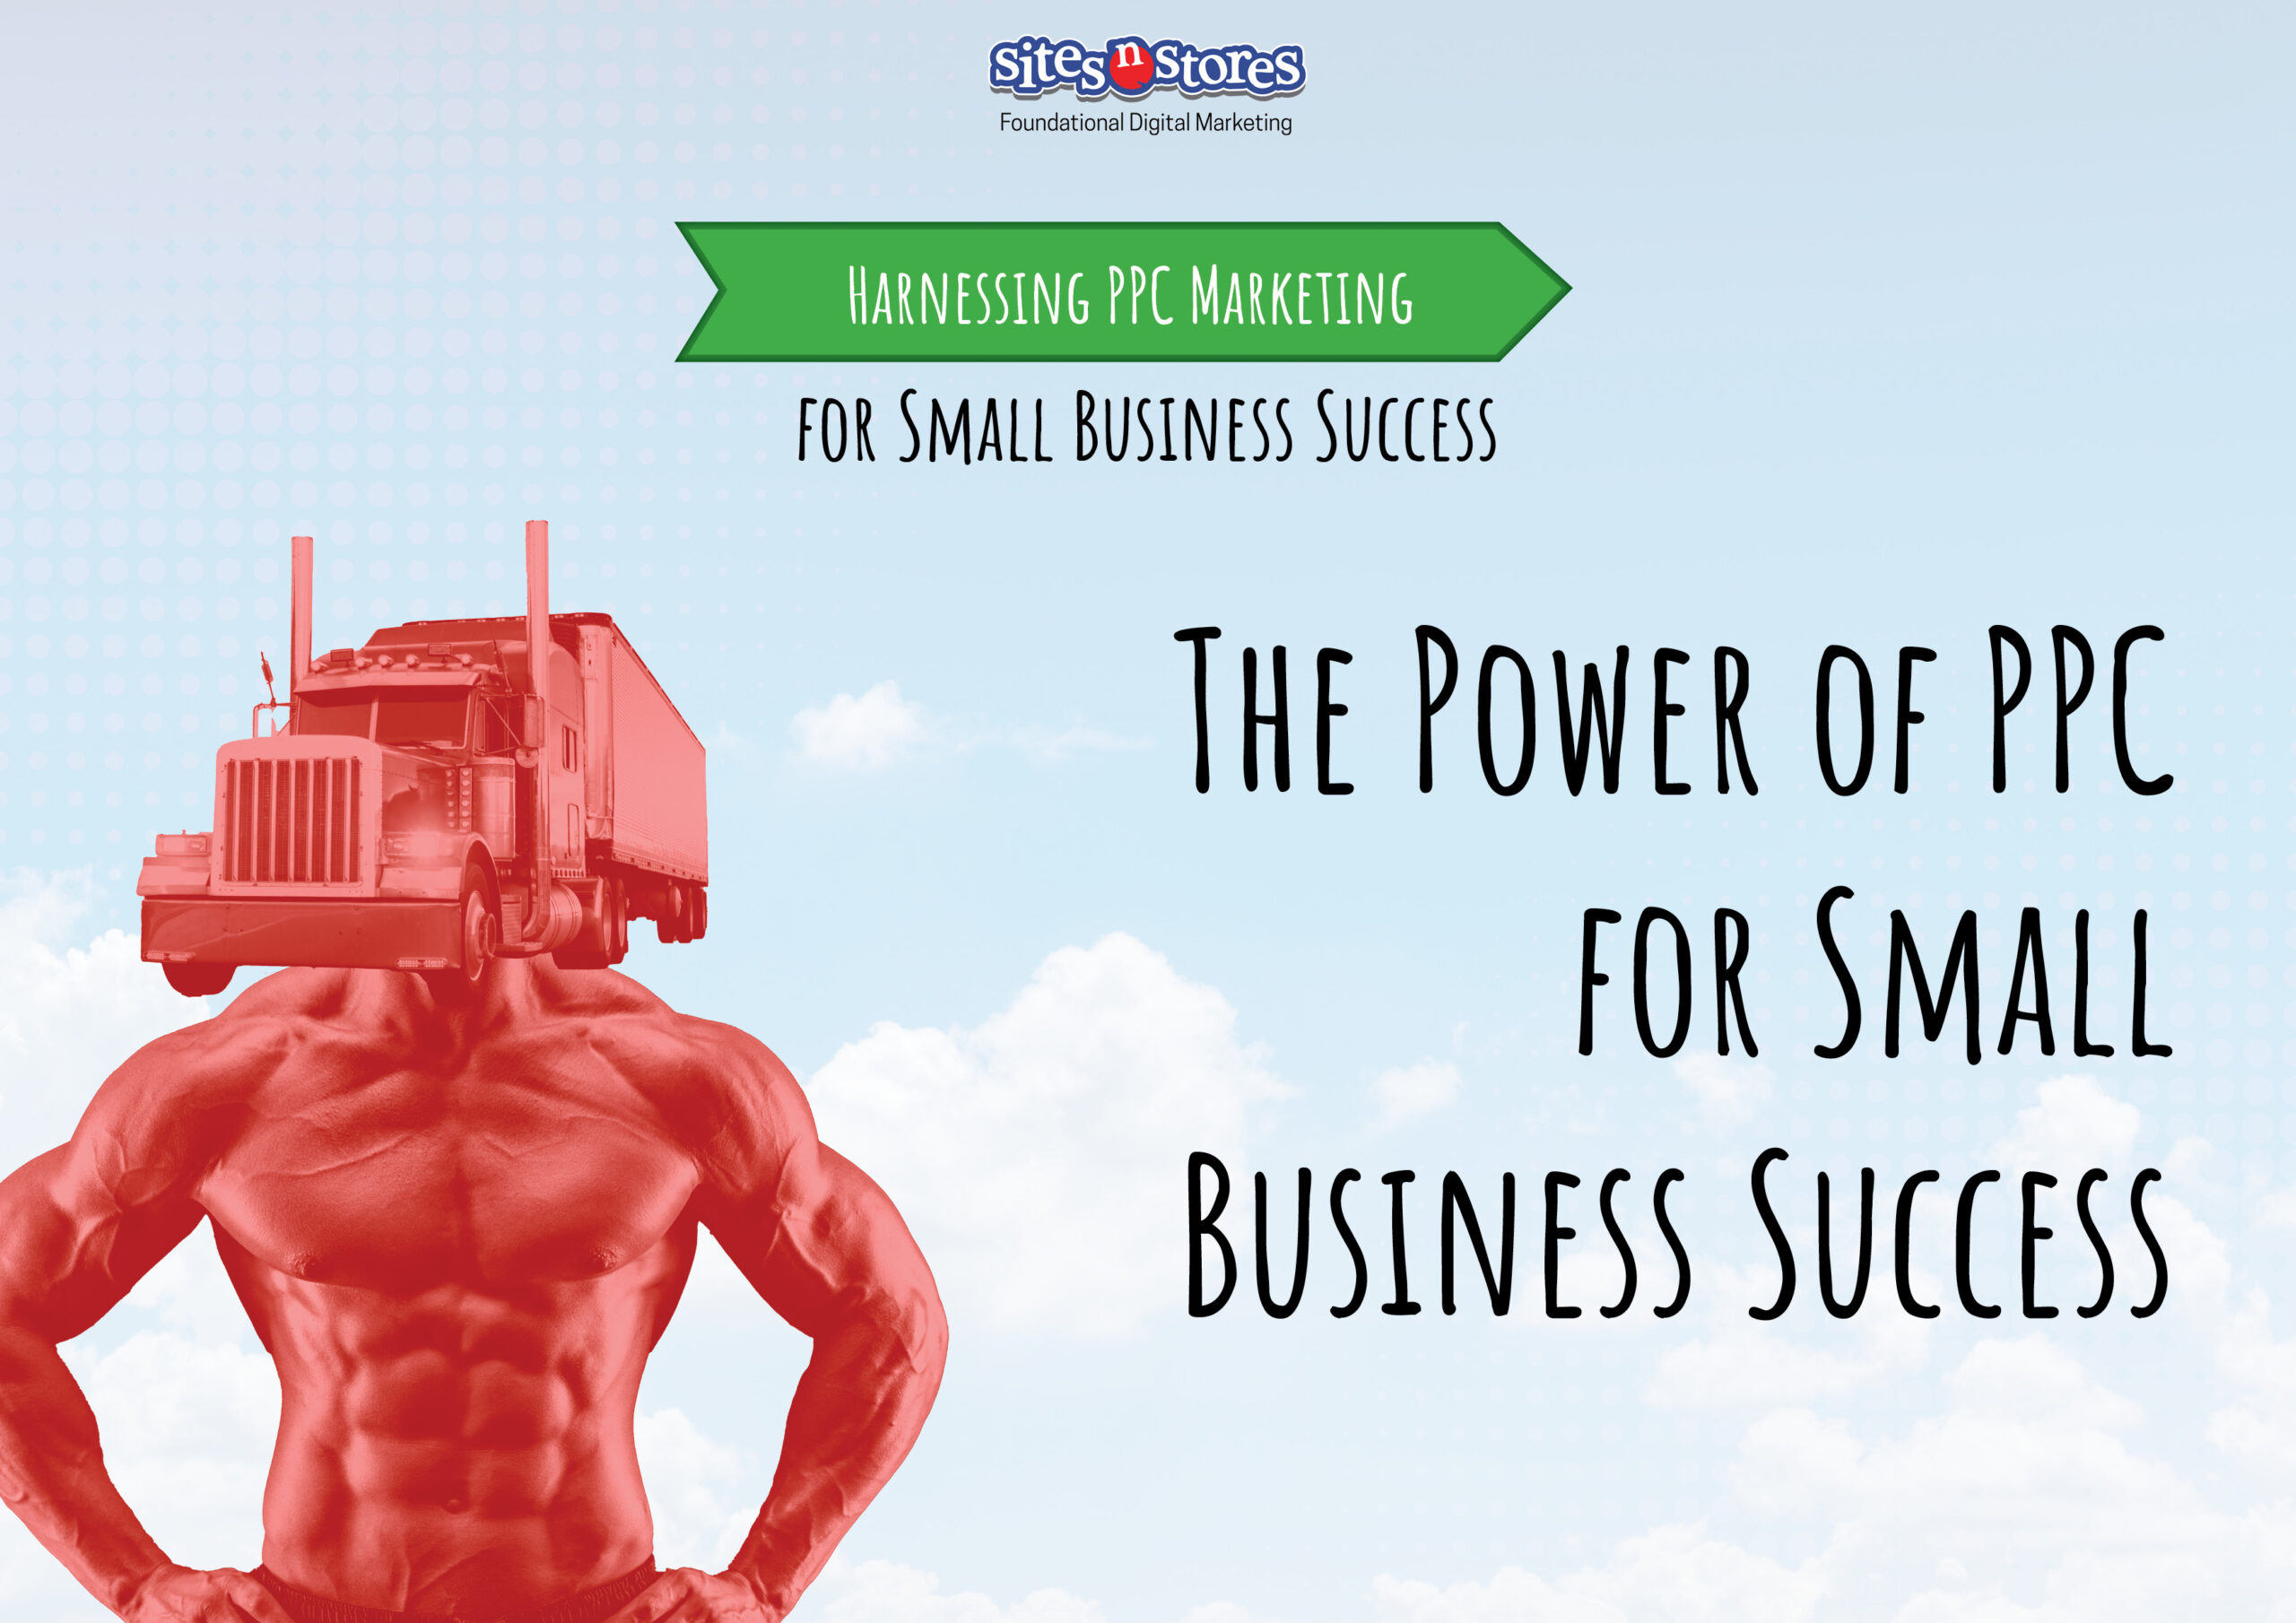 The Power of PPC for Small Business Success